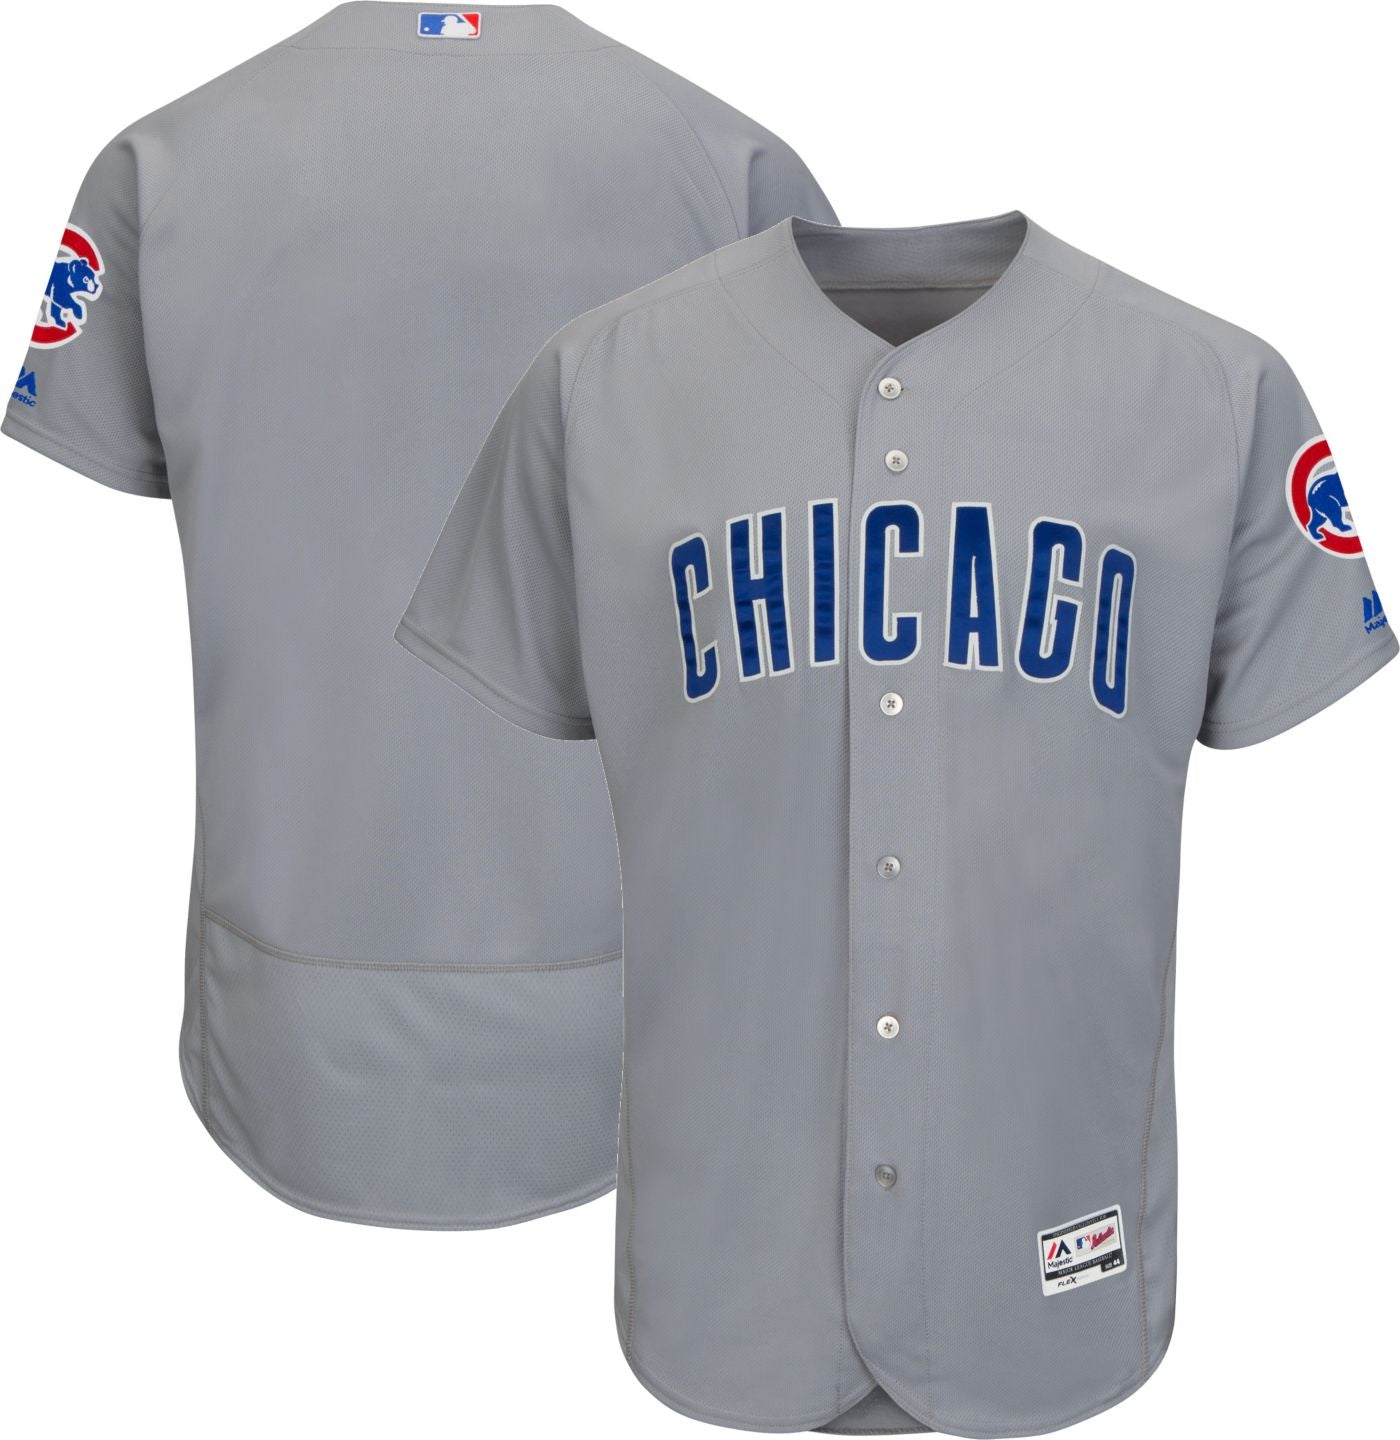 Majestic Men's Authentic Chicago Cubs Road Grey Flex Base On-Field Jersey